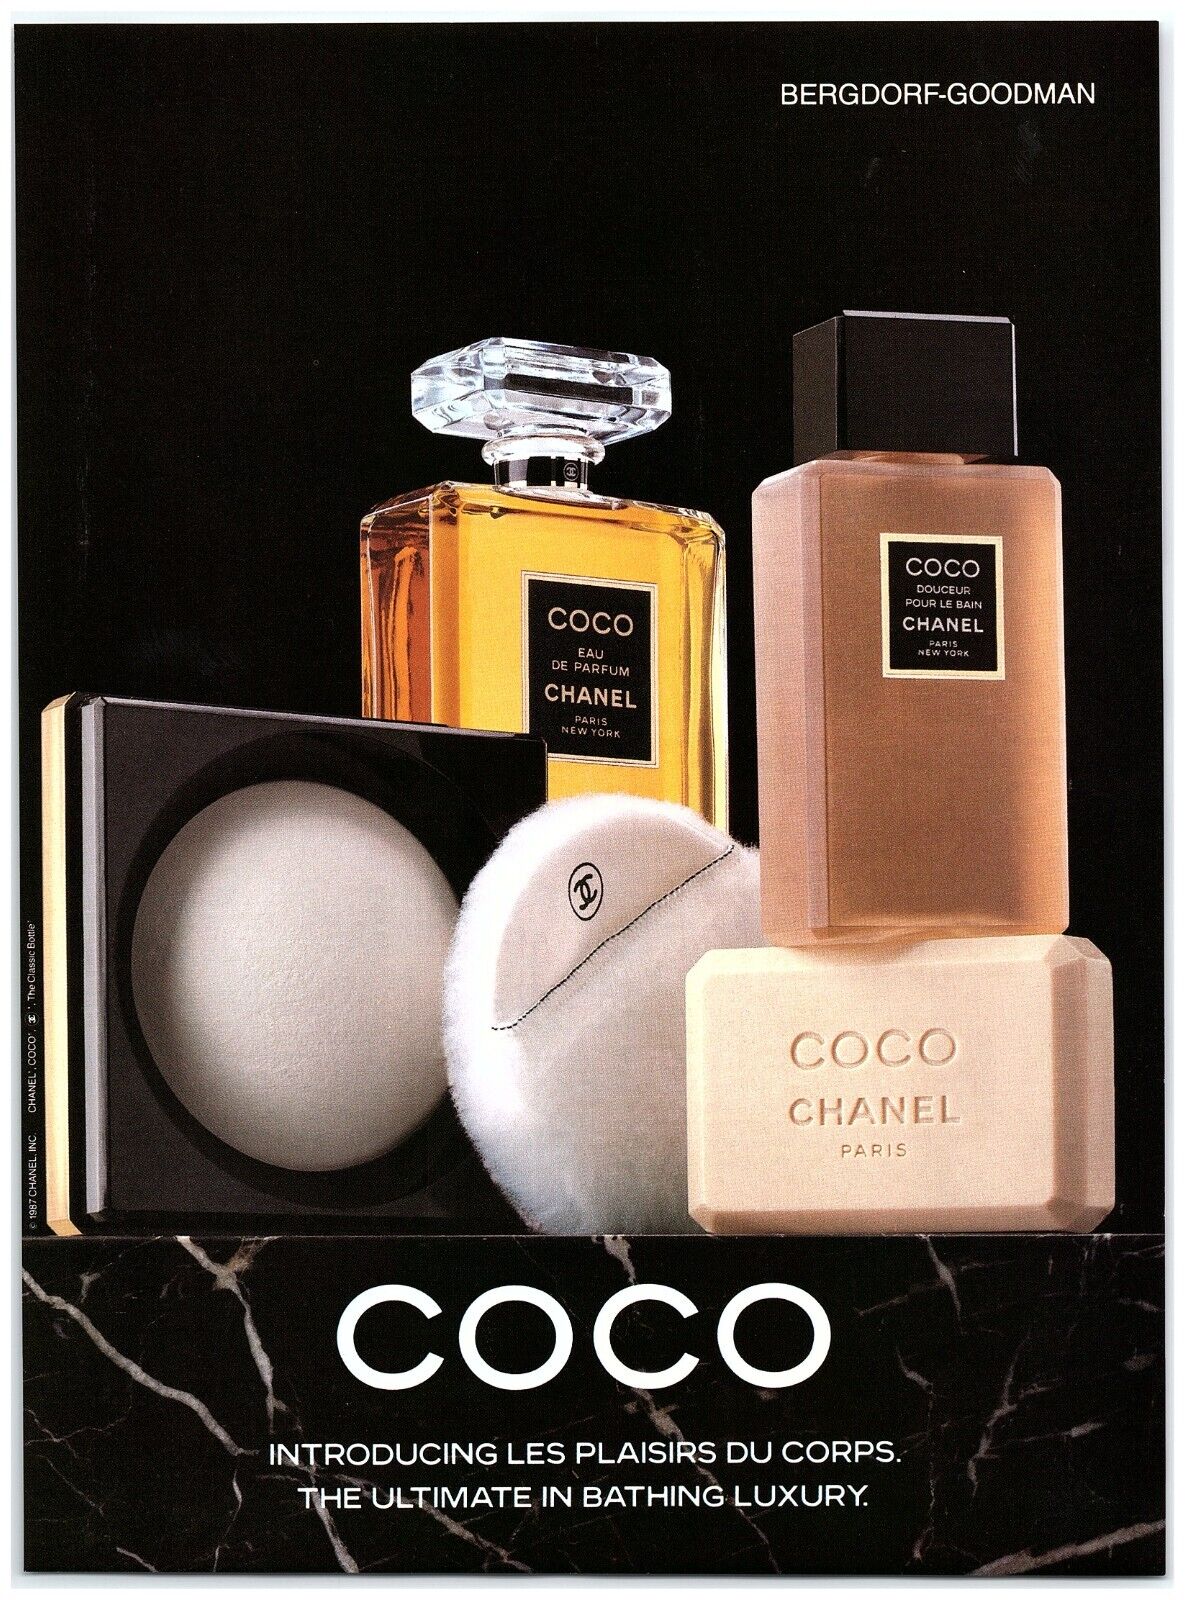 1987 Coco Chanel Print Ad, The Ultimate in Bathing Luxury Les Plaisirs Du Corps